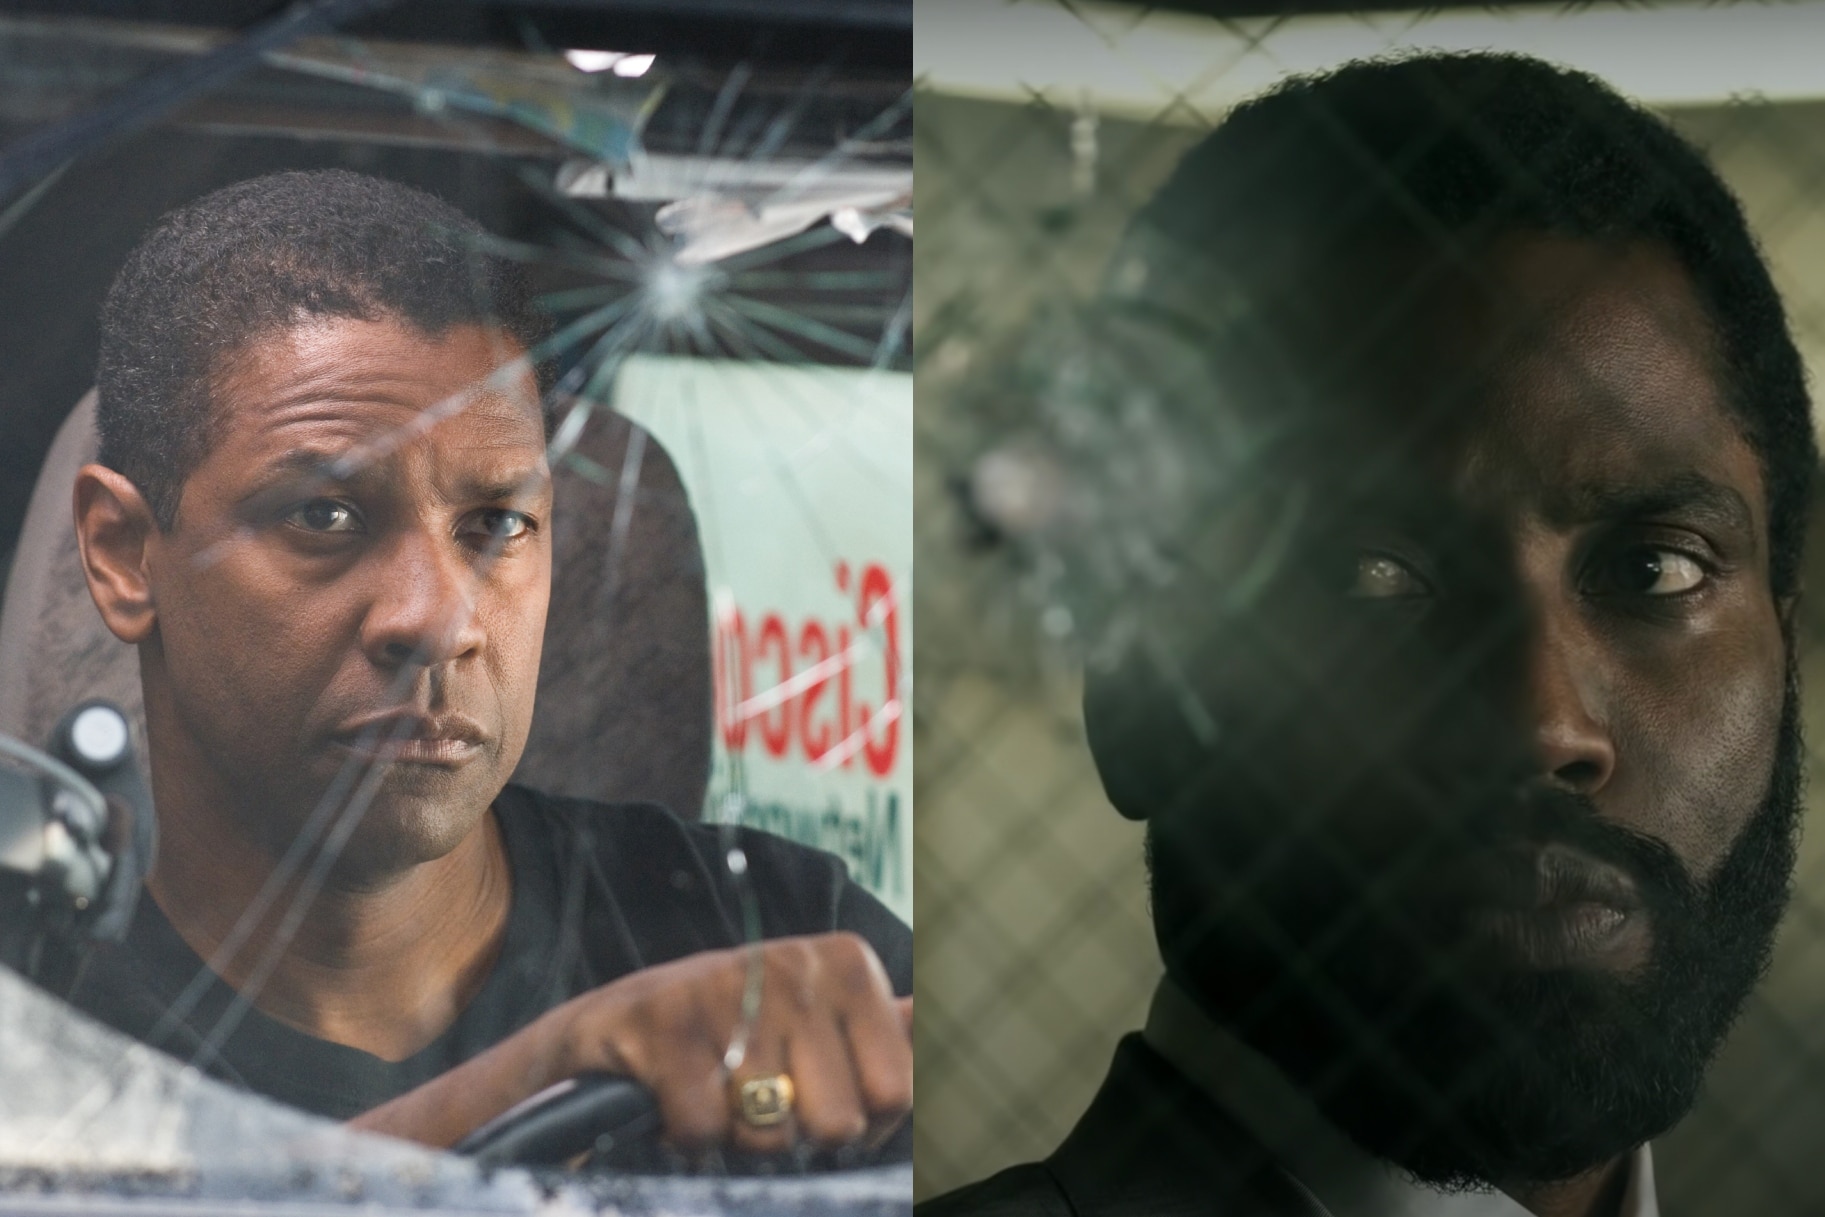 In 'The Equalizer 2' Trailer, Denzel Washington Travels the Globe - The New  York Times